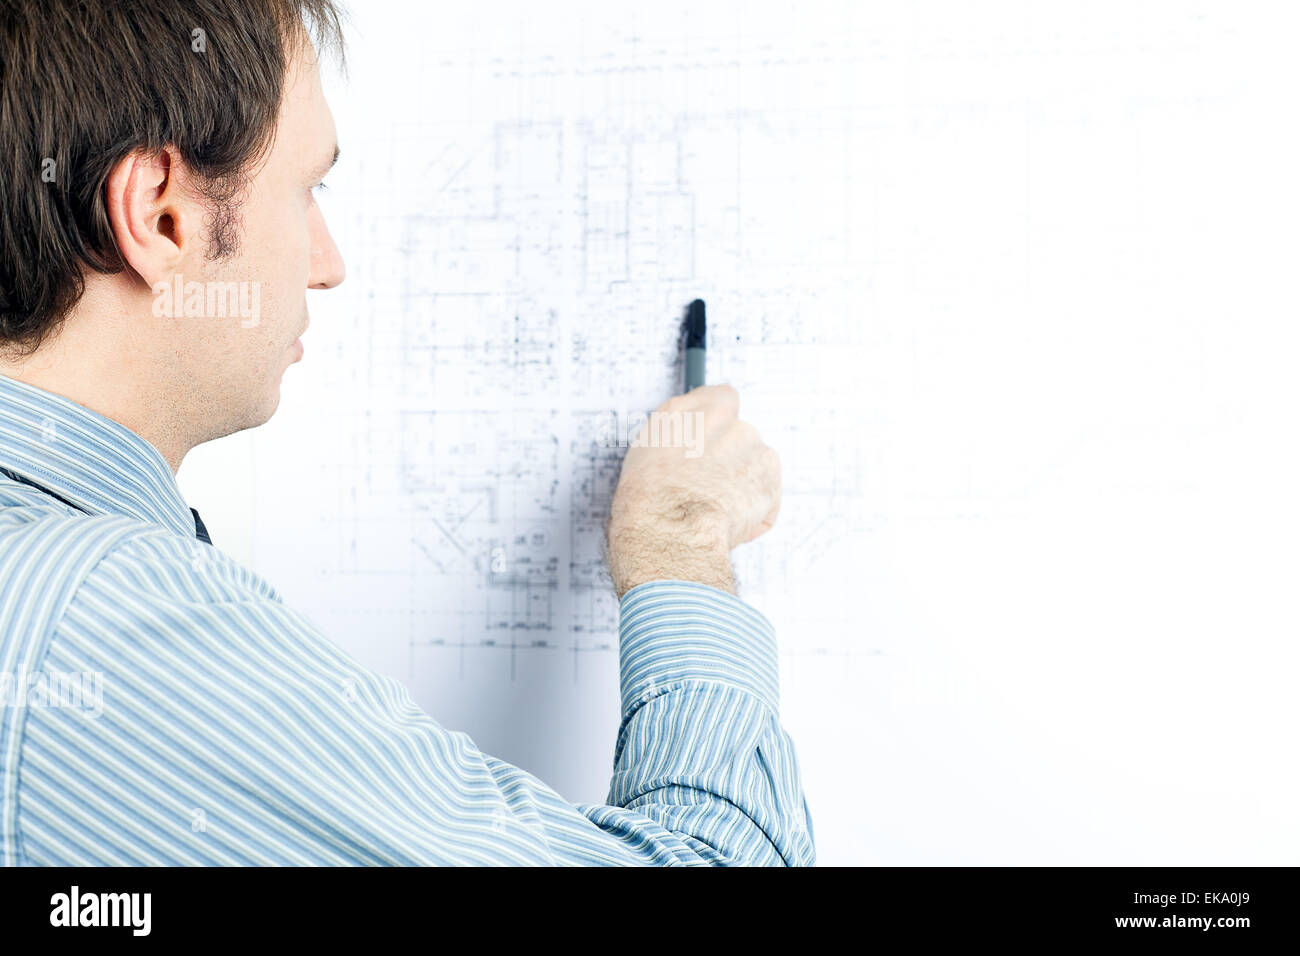 young man architect presenting a project Stock Photo